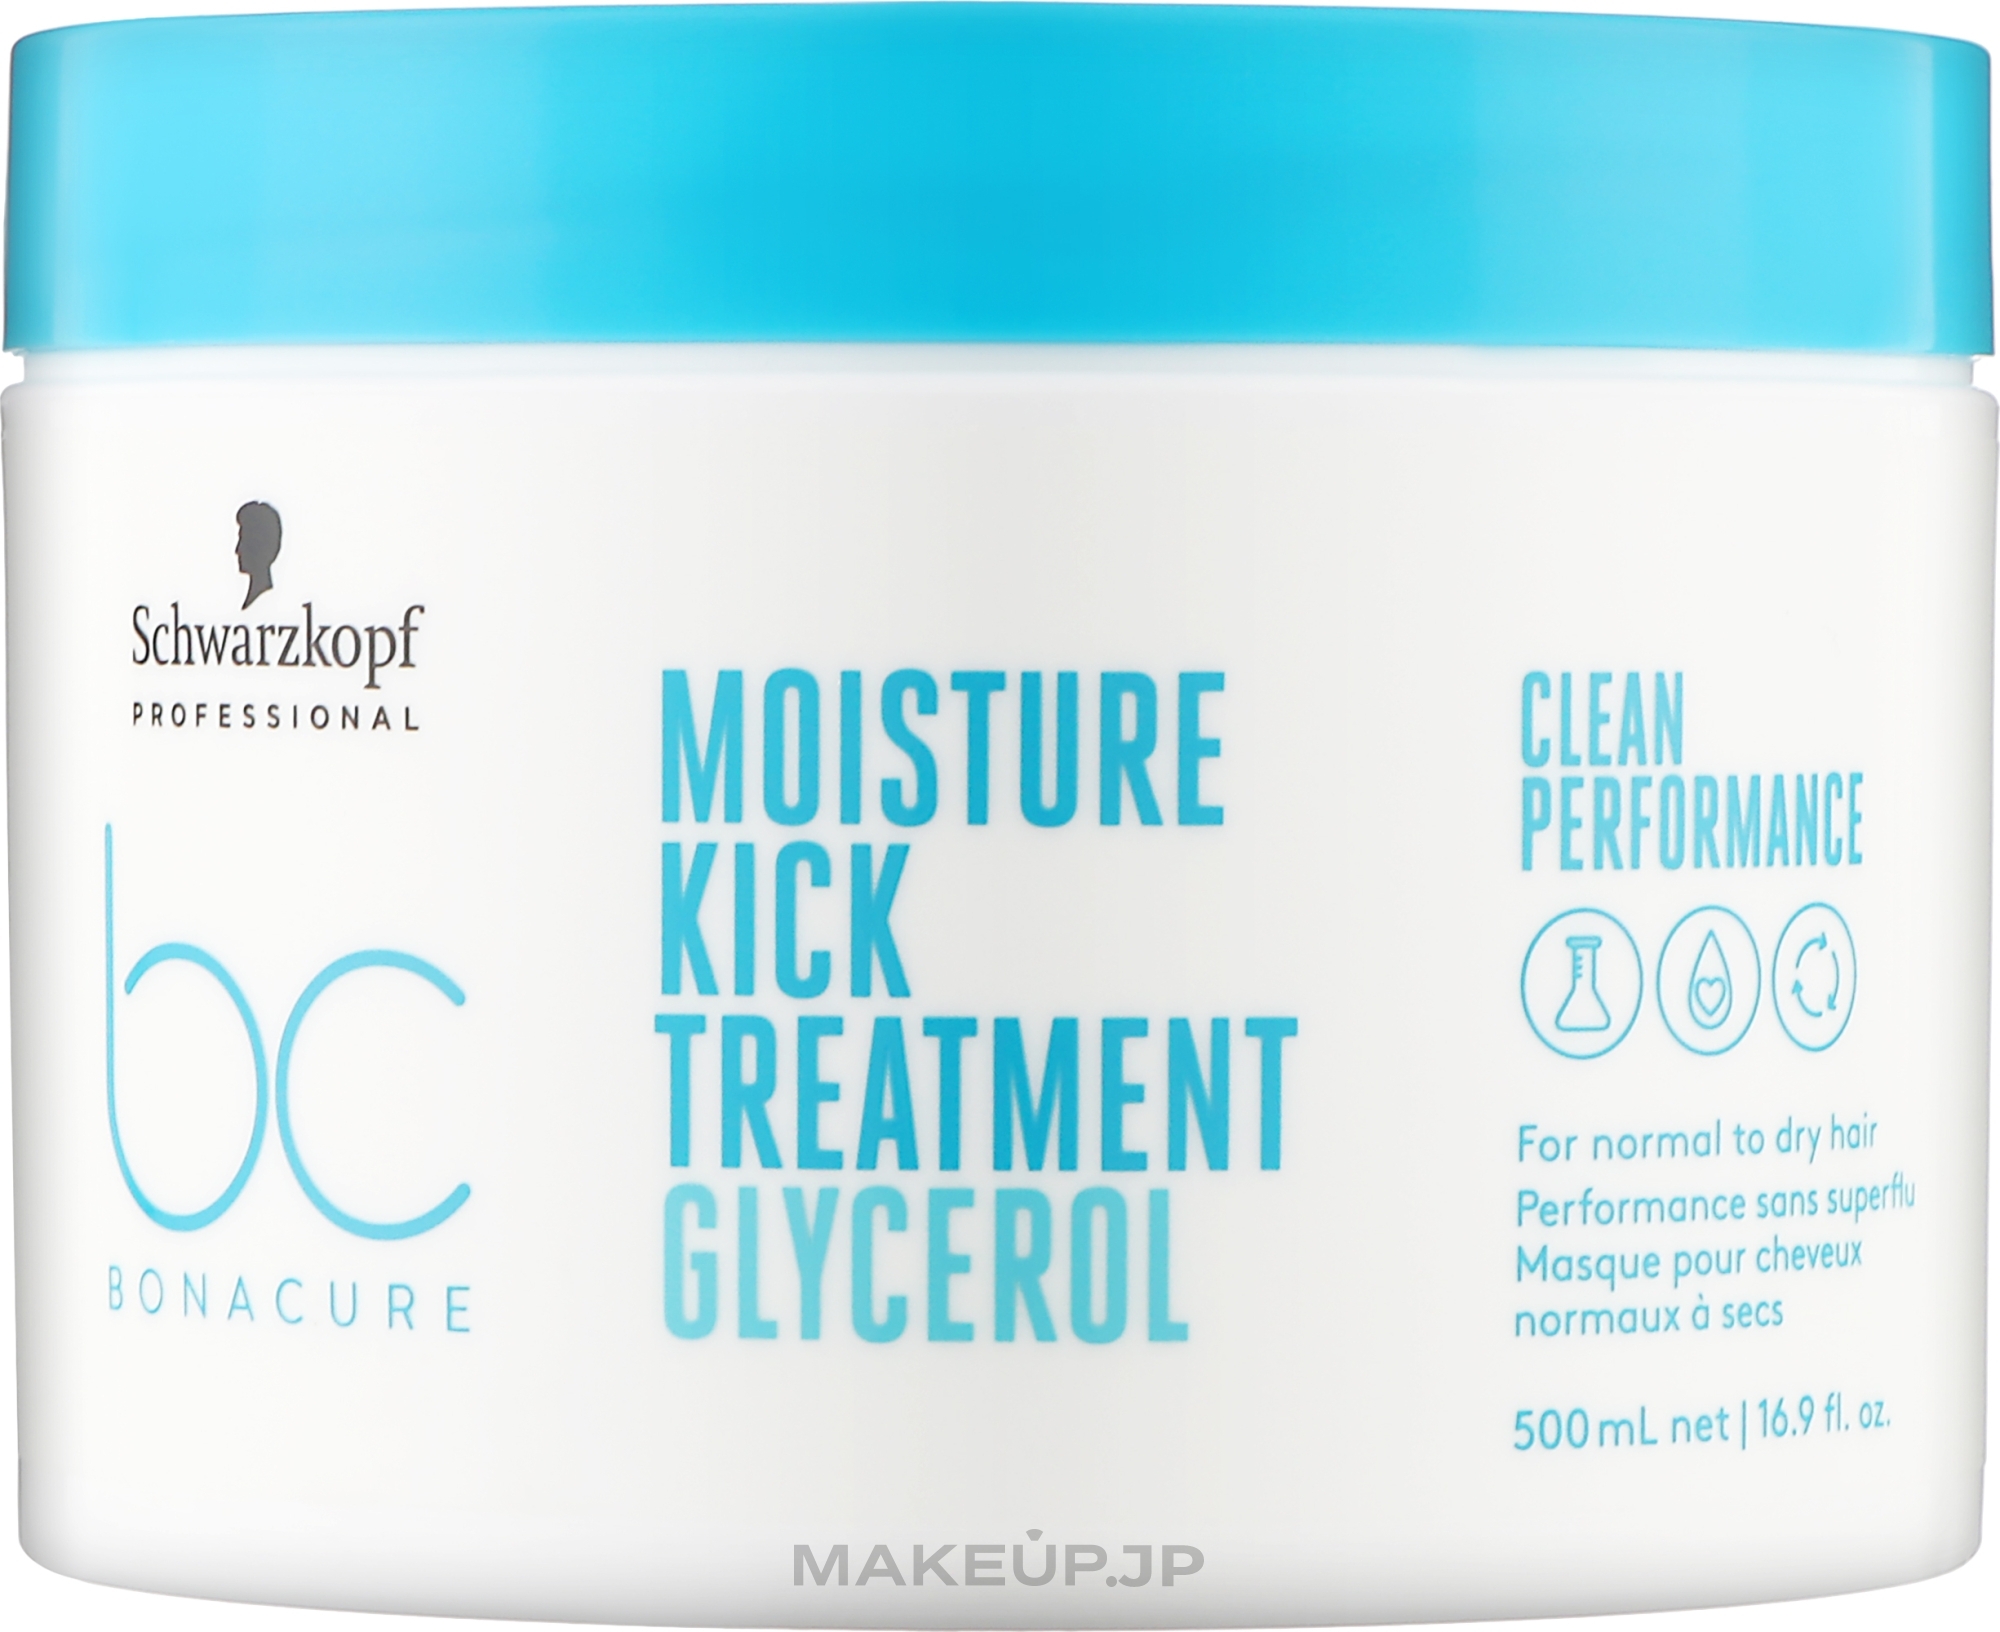 Mask for Normal and Dry Hair - Schwarzkopf Professional Bonacure Moisture Kick Treatment Glycerol — photo 500 ml